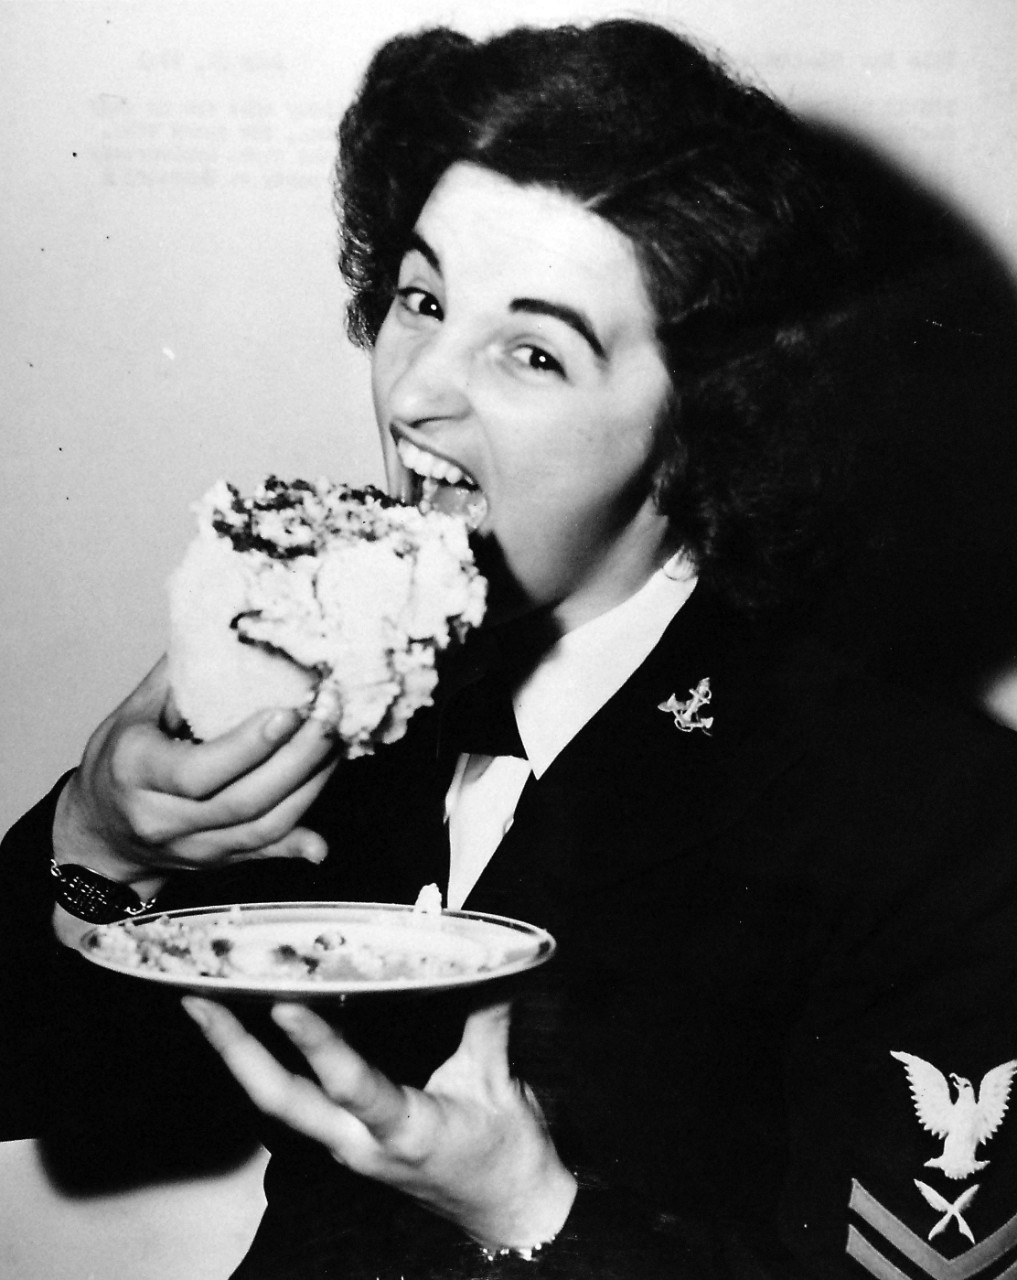 80-G-42495:  Celebration of the WAVES’ First Anniversary, July 1943.  Yeoman Second Class Dorothy Barbara opens wide while eating her piece of birthday cake at the party held in Quarters A, Washington Navy Yard, Washington, D.C.  Photographed:  July 30, 1943.  Official U.S. Navy photograph, now in the collections of the National Archives. 